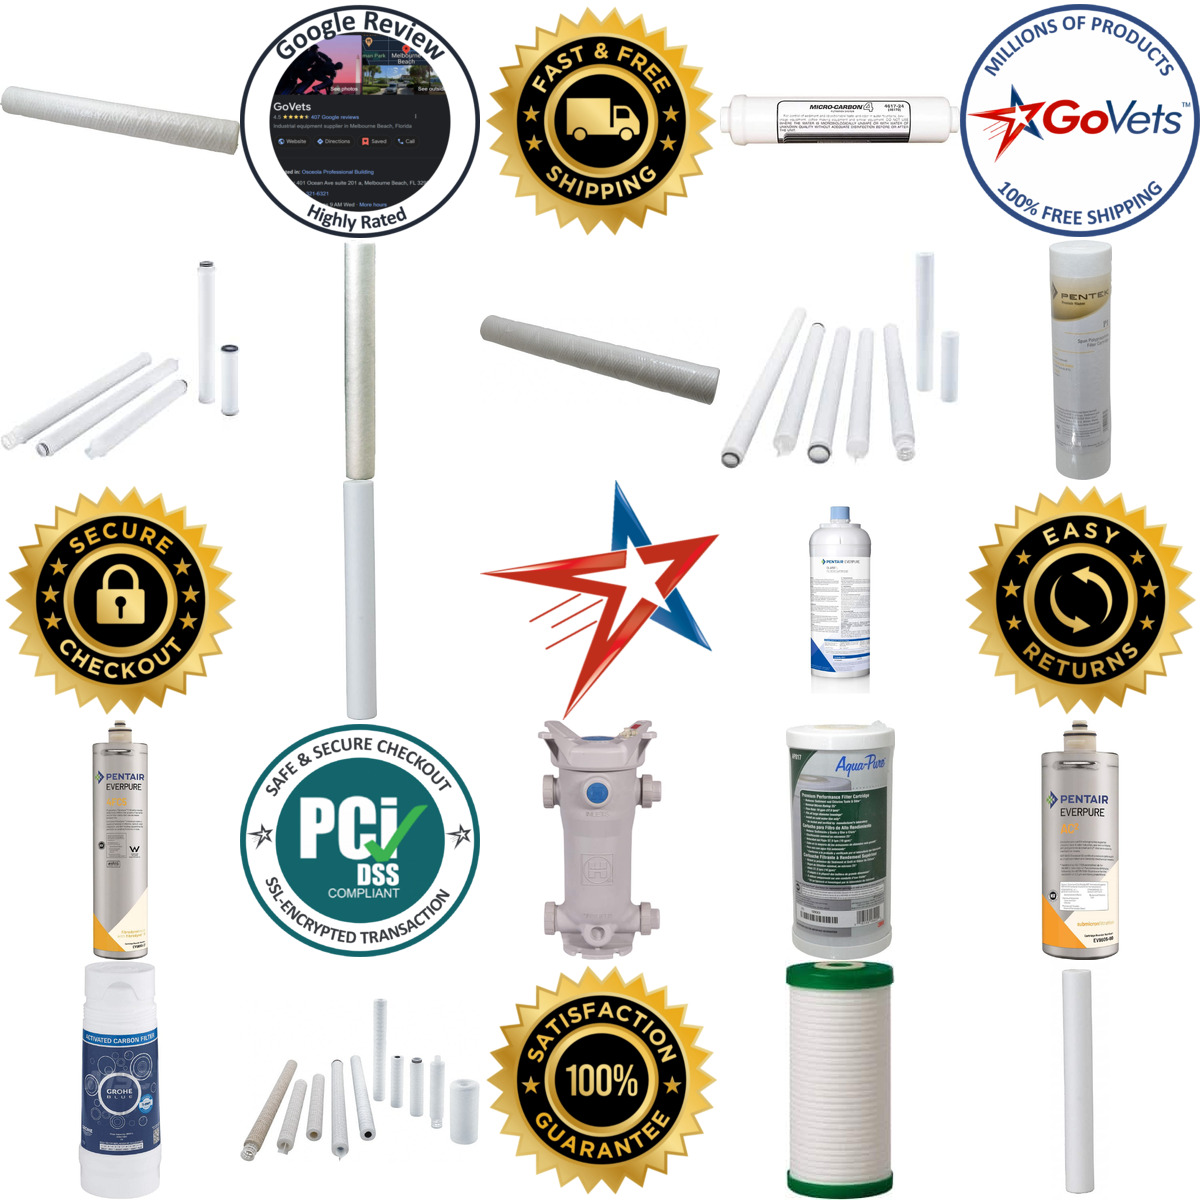 A selection of Cartridge Filters products on GoVets